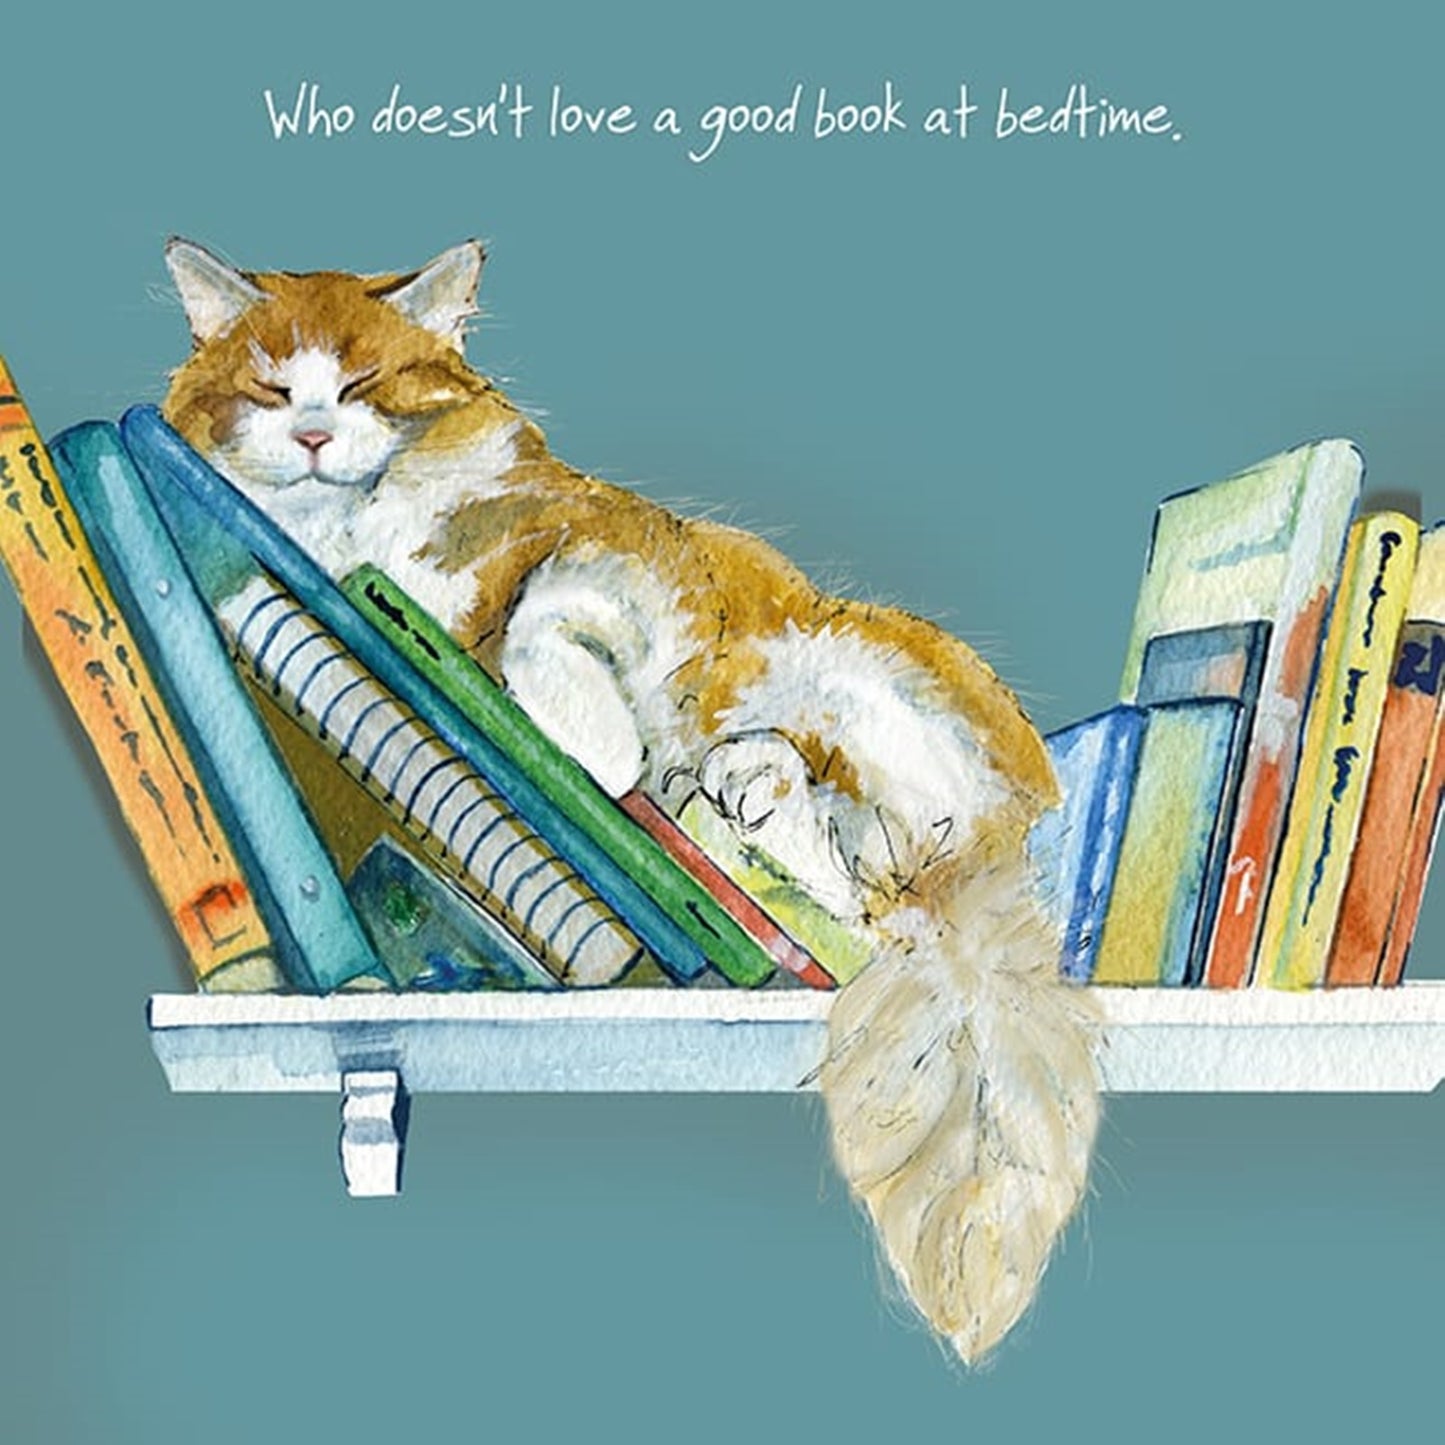 Ginger and White Cat Greeting Card "Who doesn't like a good book at bedtime"